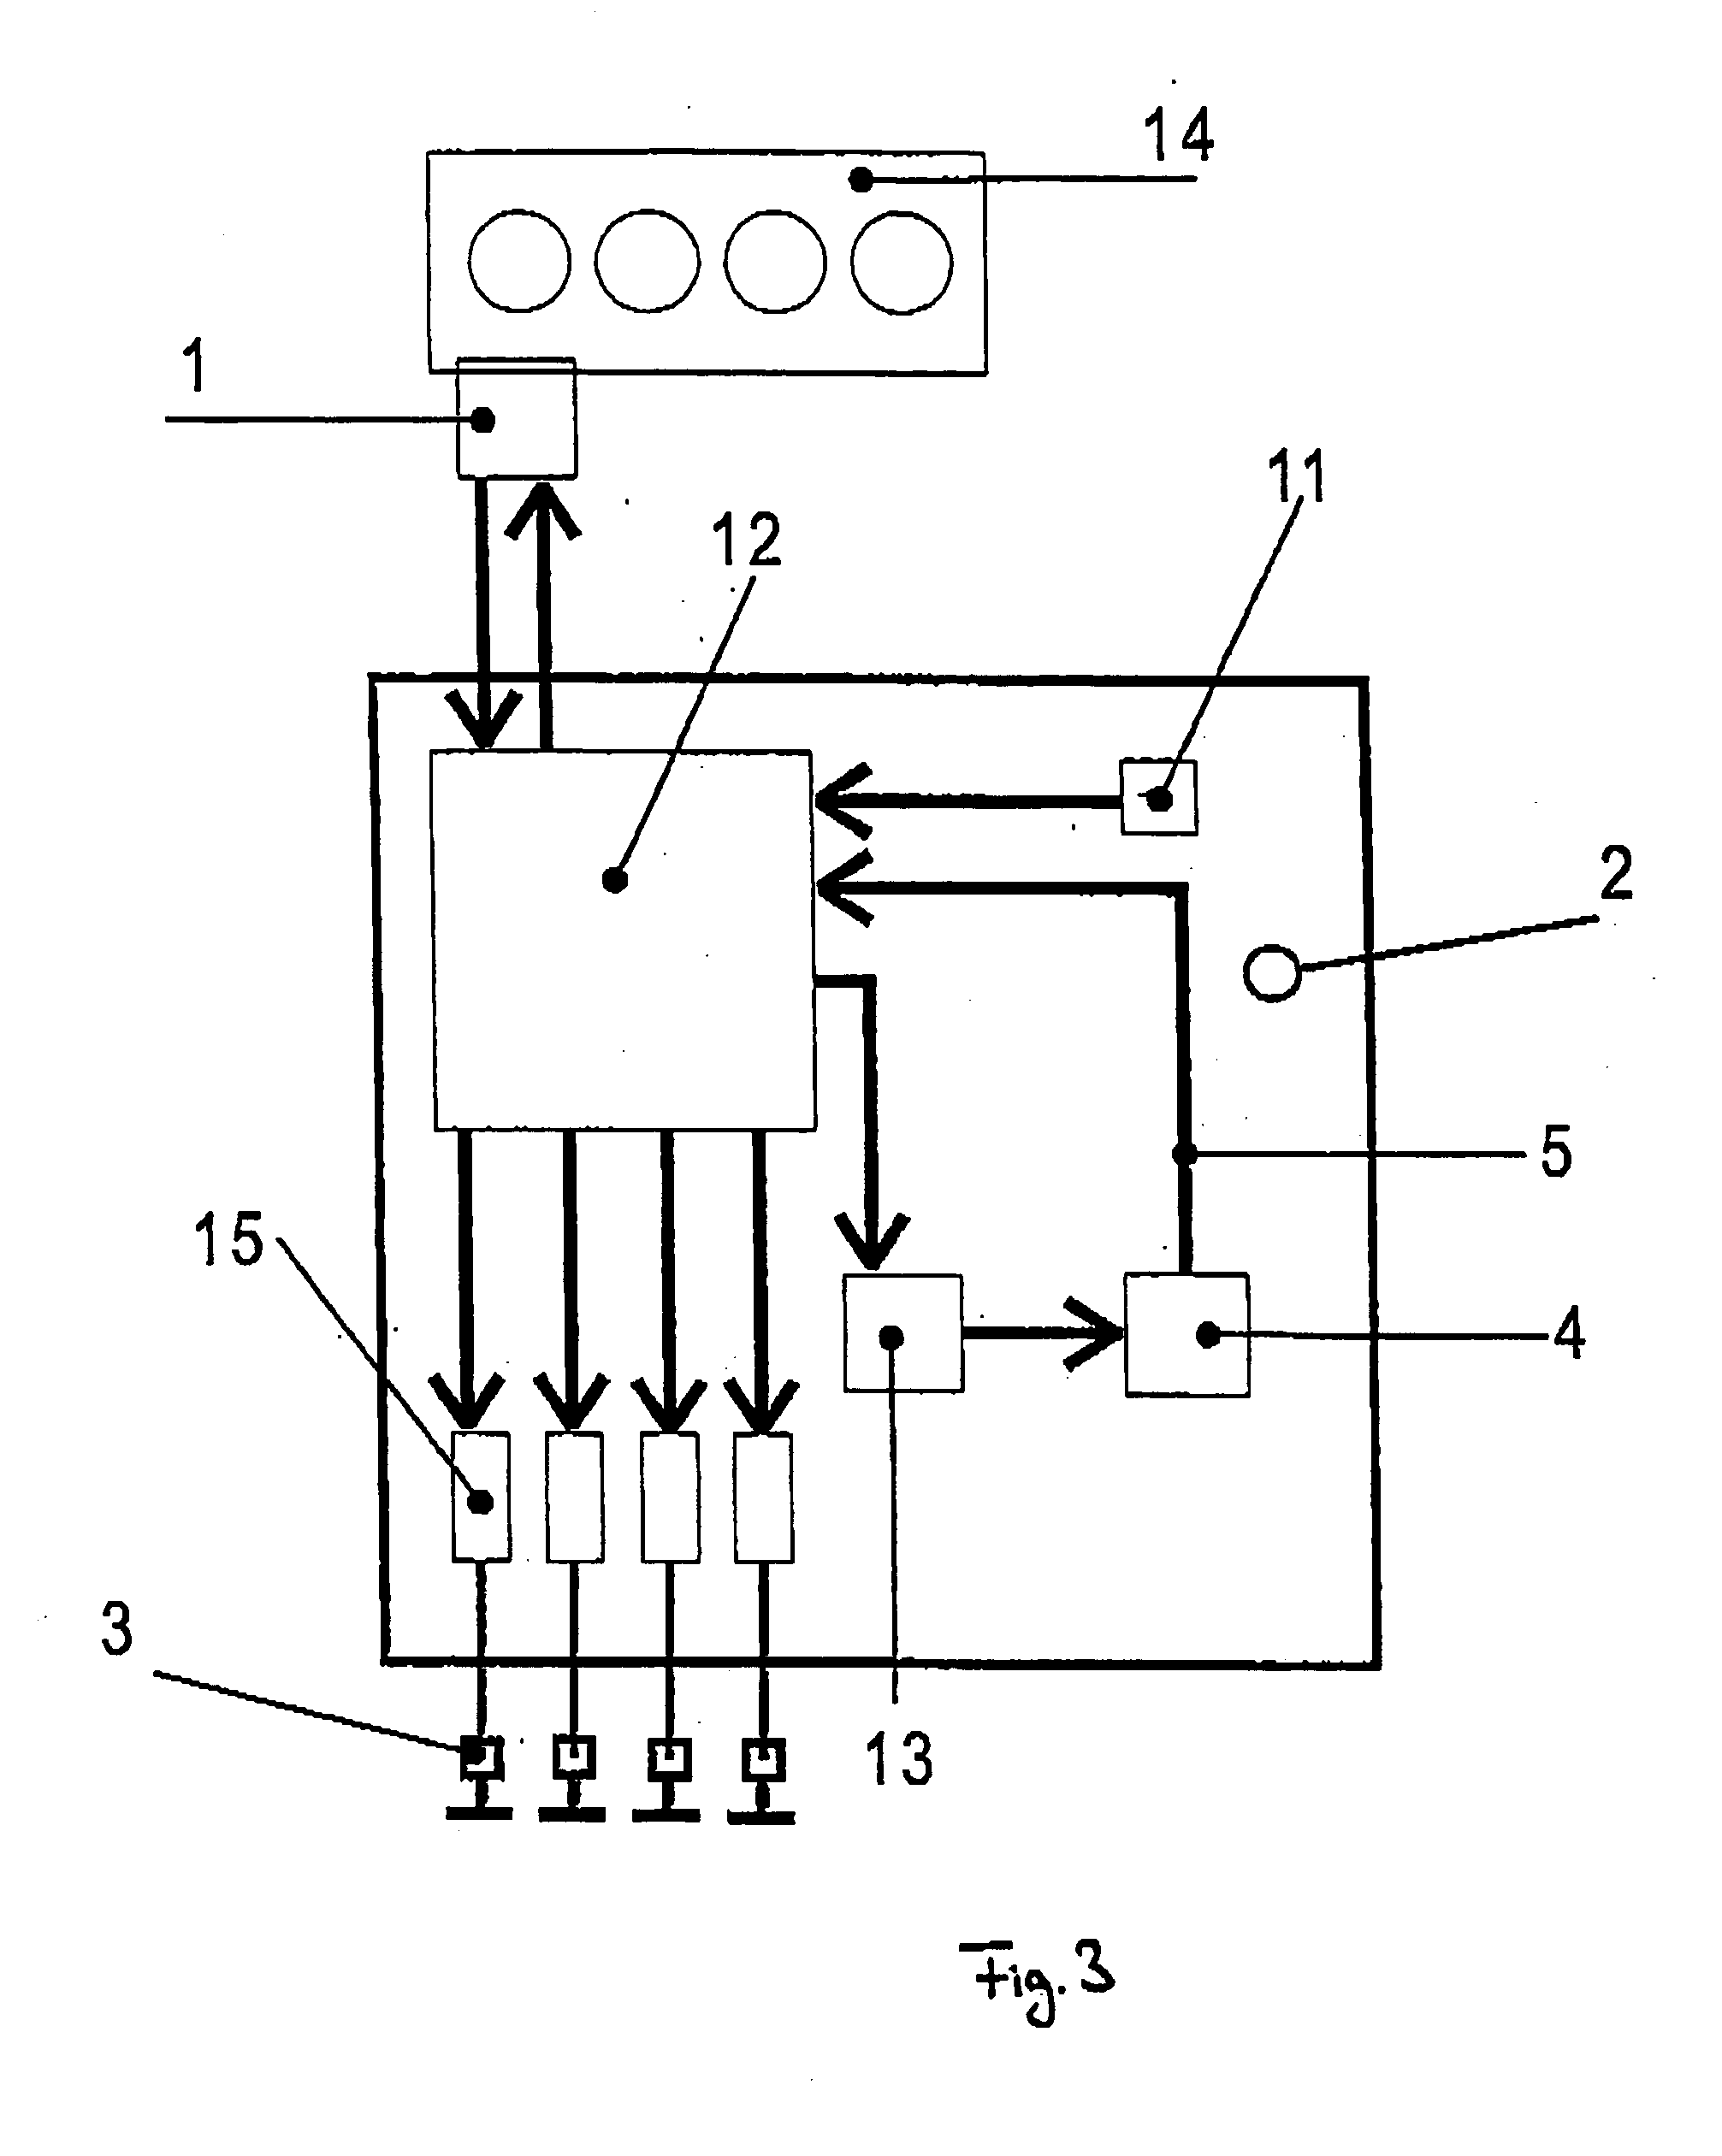 Method and device for controlling the heating of glow plugs in a diesel engine